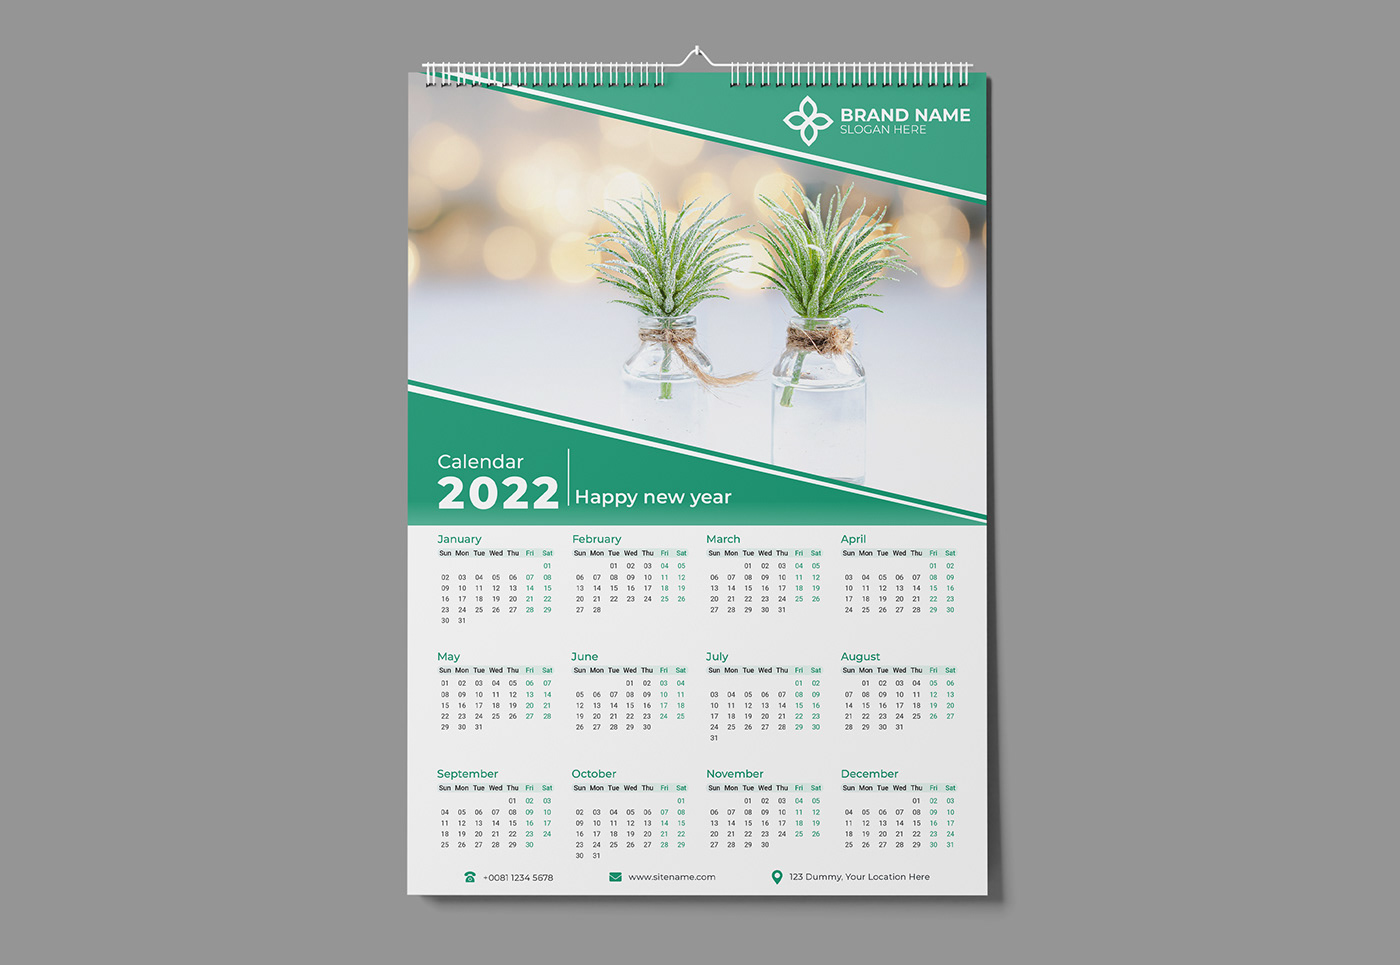 calendar Calendar 2022 calendar design calendar design 2022 Calendar Template card new year one page calendar wall calendar Wall Calendar 2022